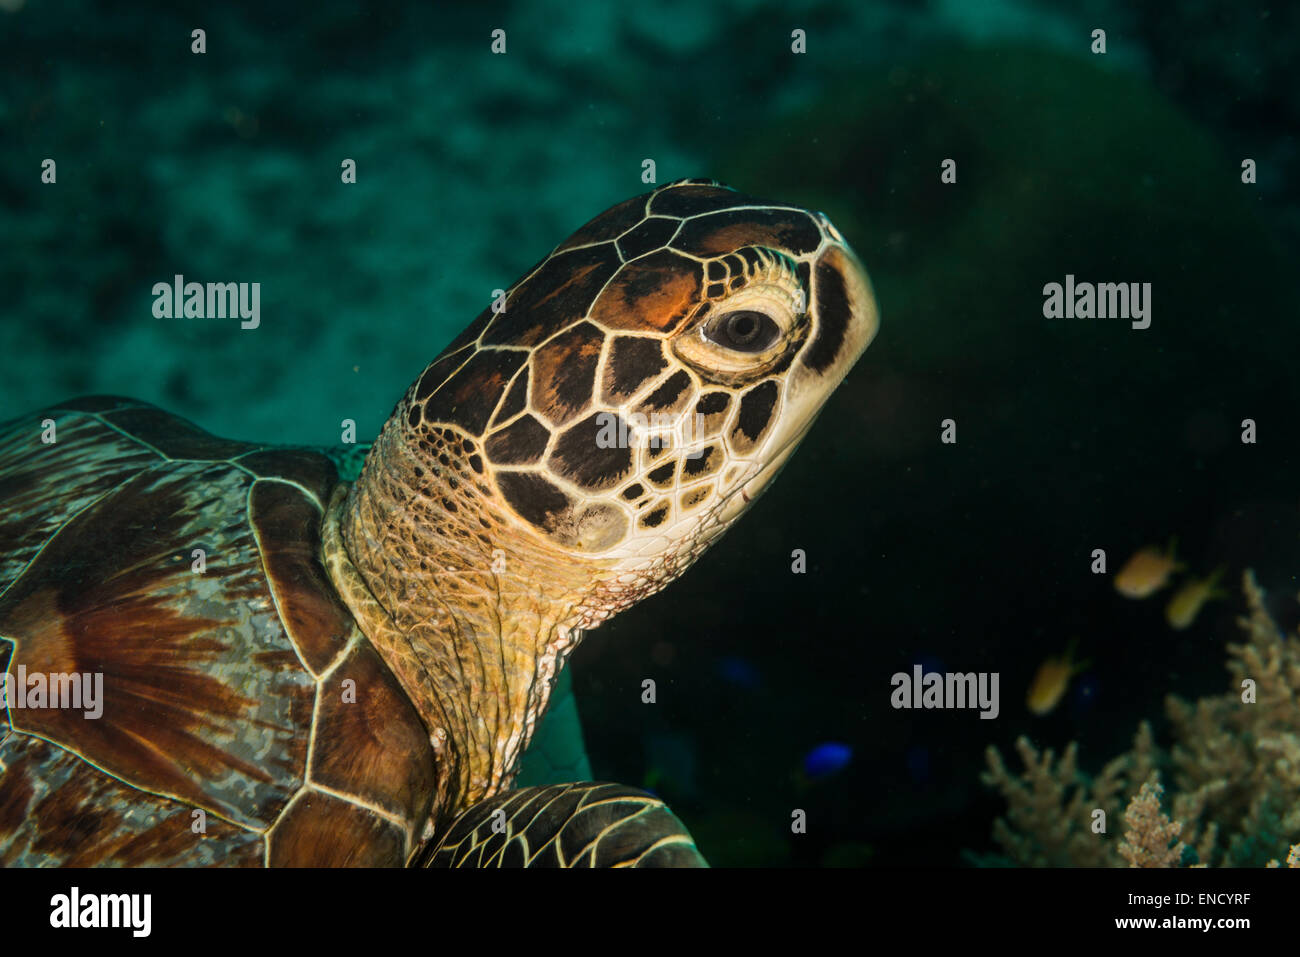 Hawksbill turtle on a coral bush Stock Photo